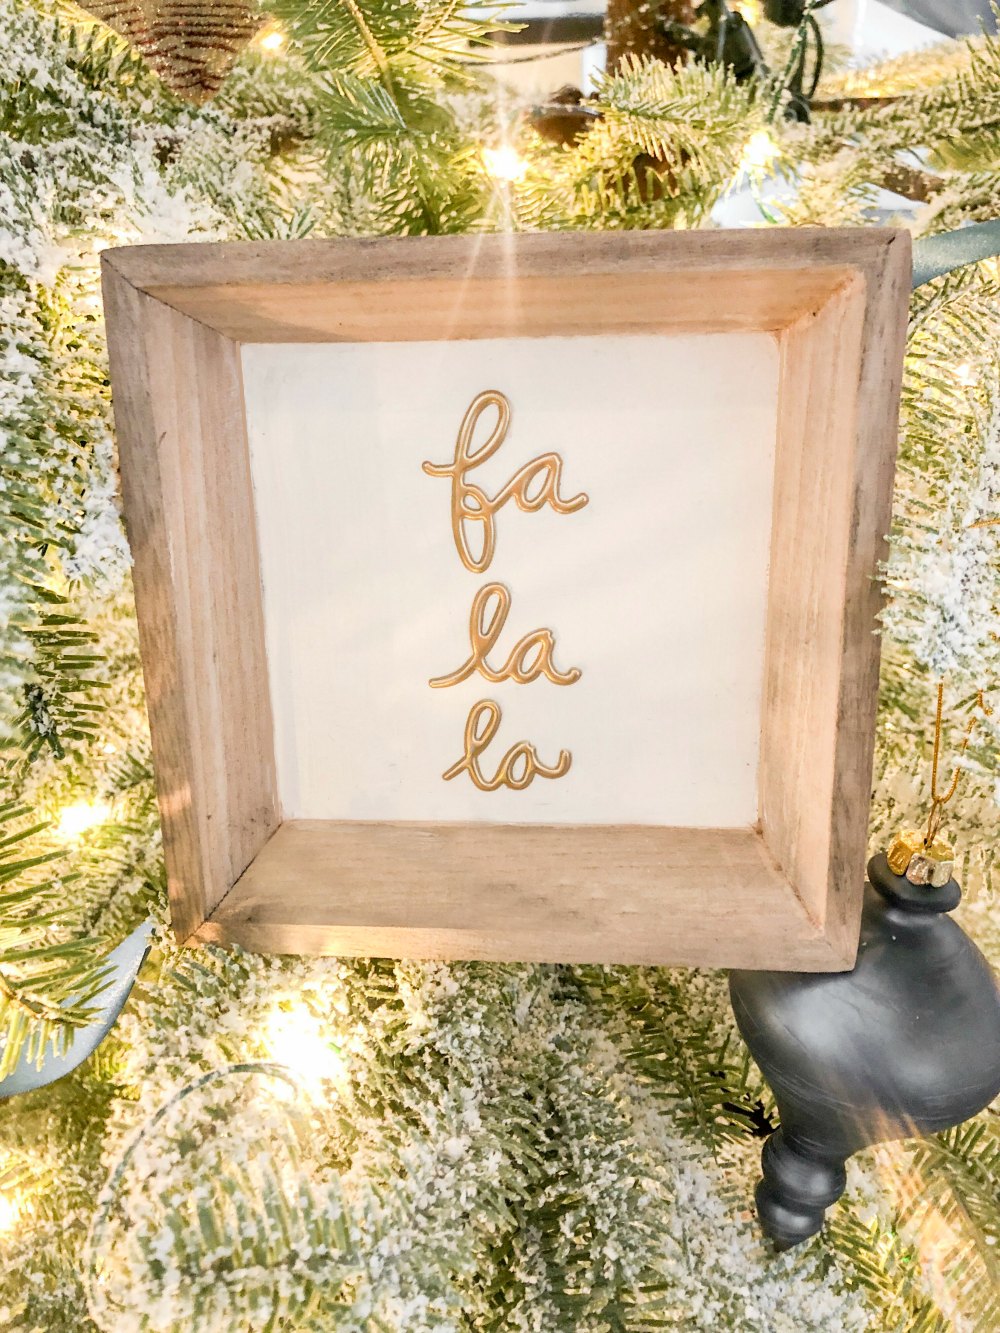 Farmhouse Christmas Sign Ornaments DIY. Create neutral farmhouse-style ornaments with $1 frames and thickers. It's so easy and goes with any decor! ﻿